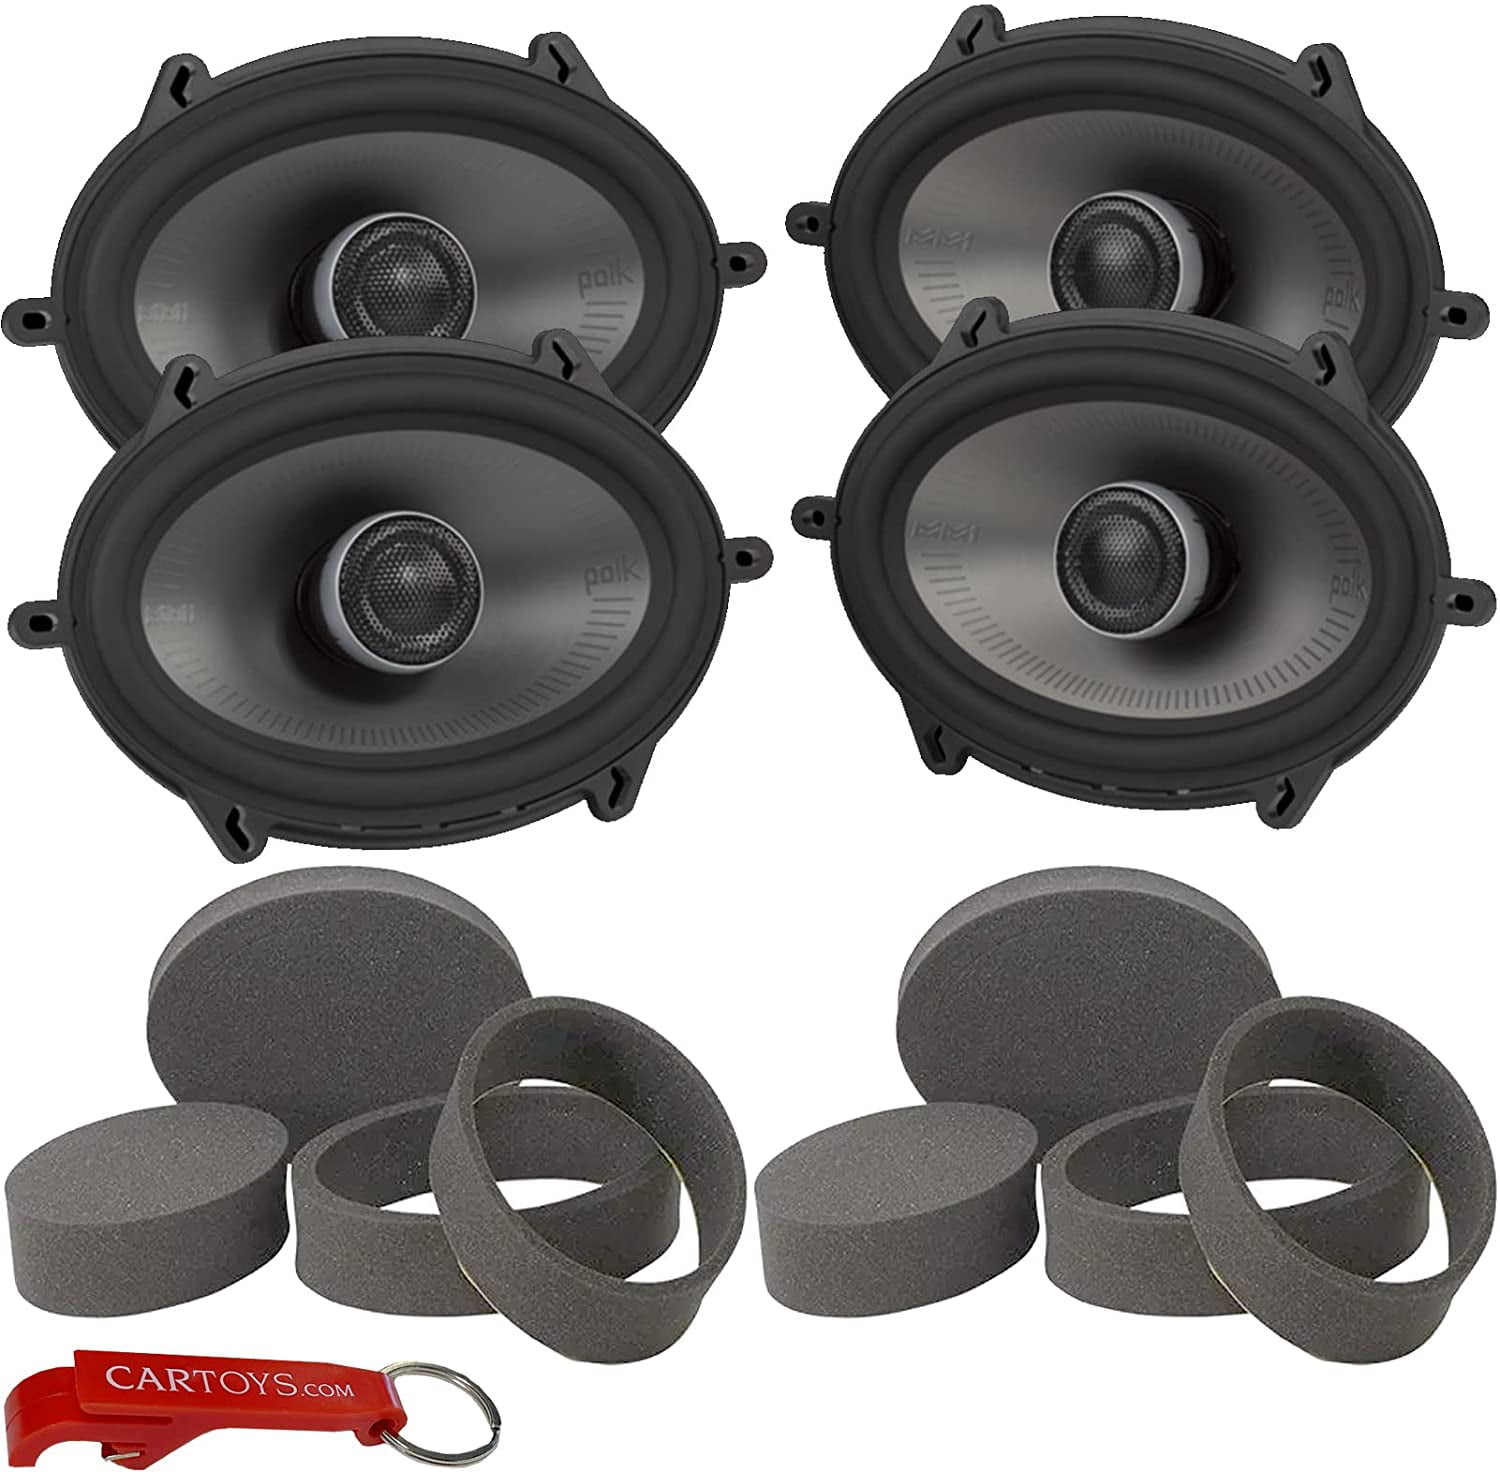 reinigen Sleutel duisternis Polk Audio MM1 Series MM572 Speakers and Fast Rings 4-Pack Bundle. 5x7 Inch  300W Peak, 100 W RMS Coaxials for Marine/Boat/ATV/Car Audio, Rings Increase  Mid-Bass, Reduce Vibration & Rear Reflection - Walmart.com